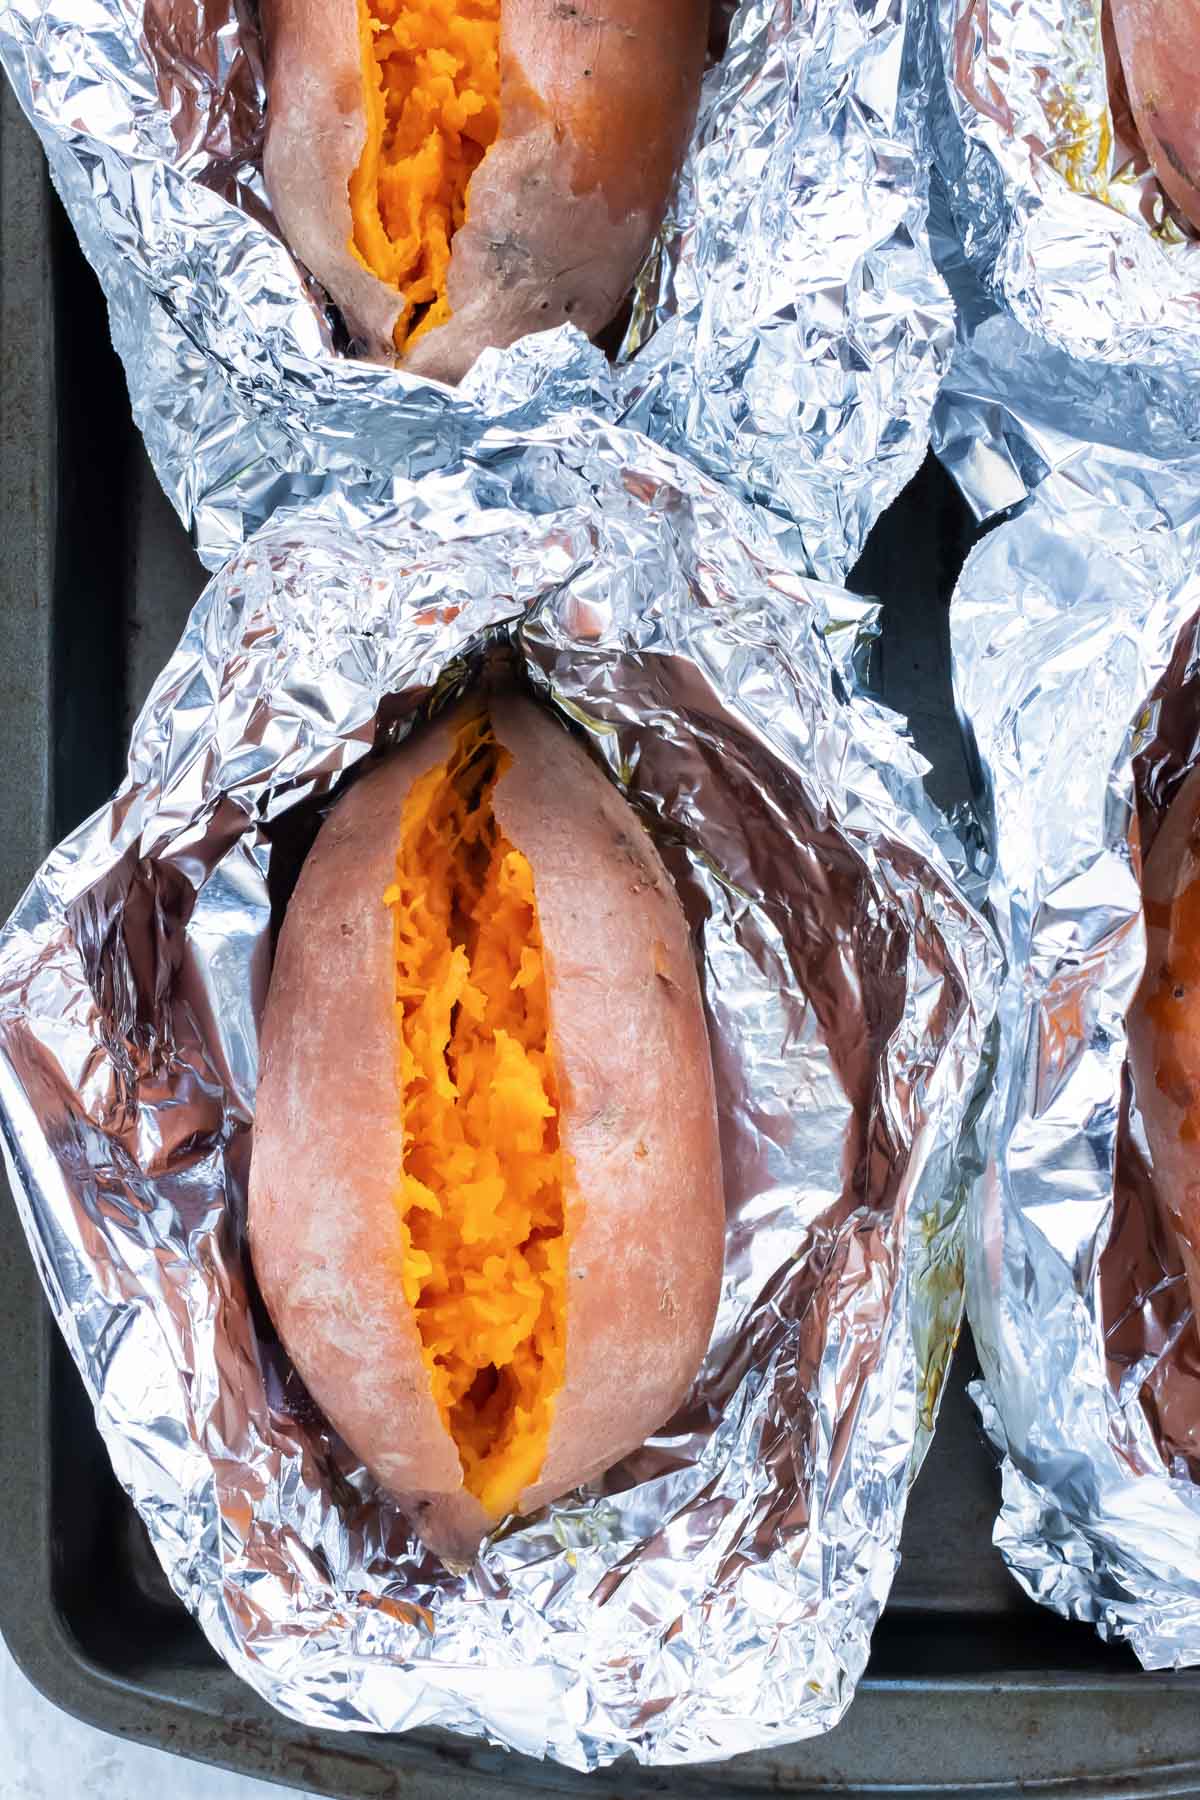 Four sweet potatoes that have been baked on a sheet pan in the oven.